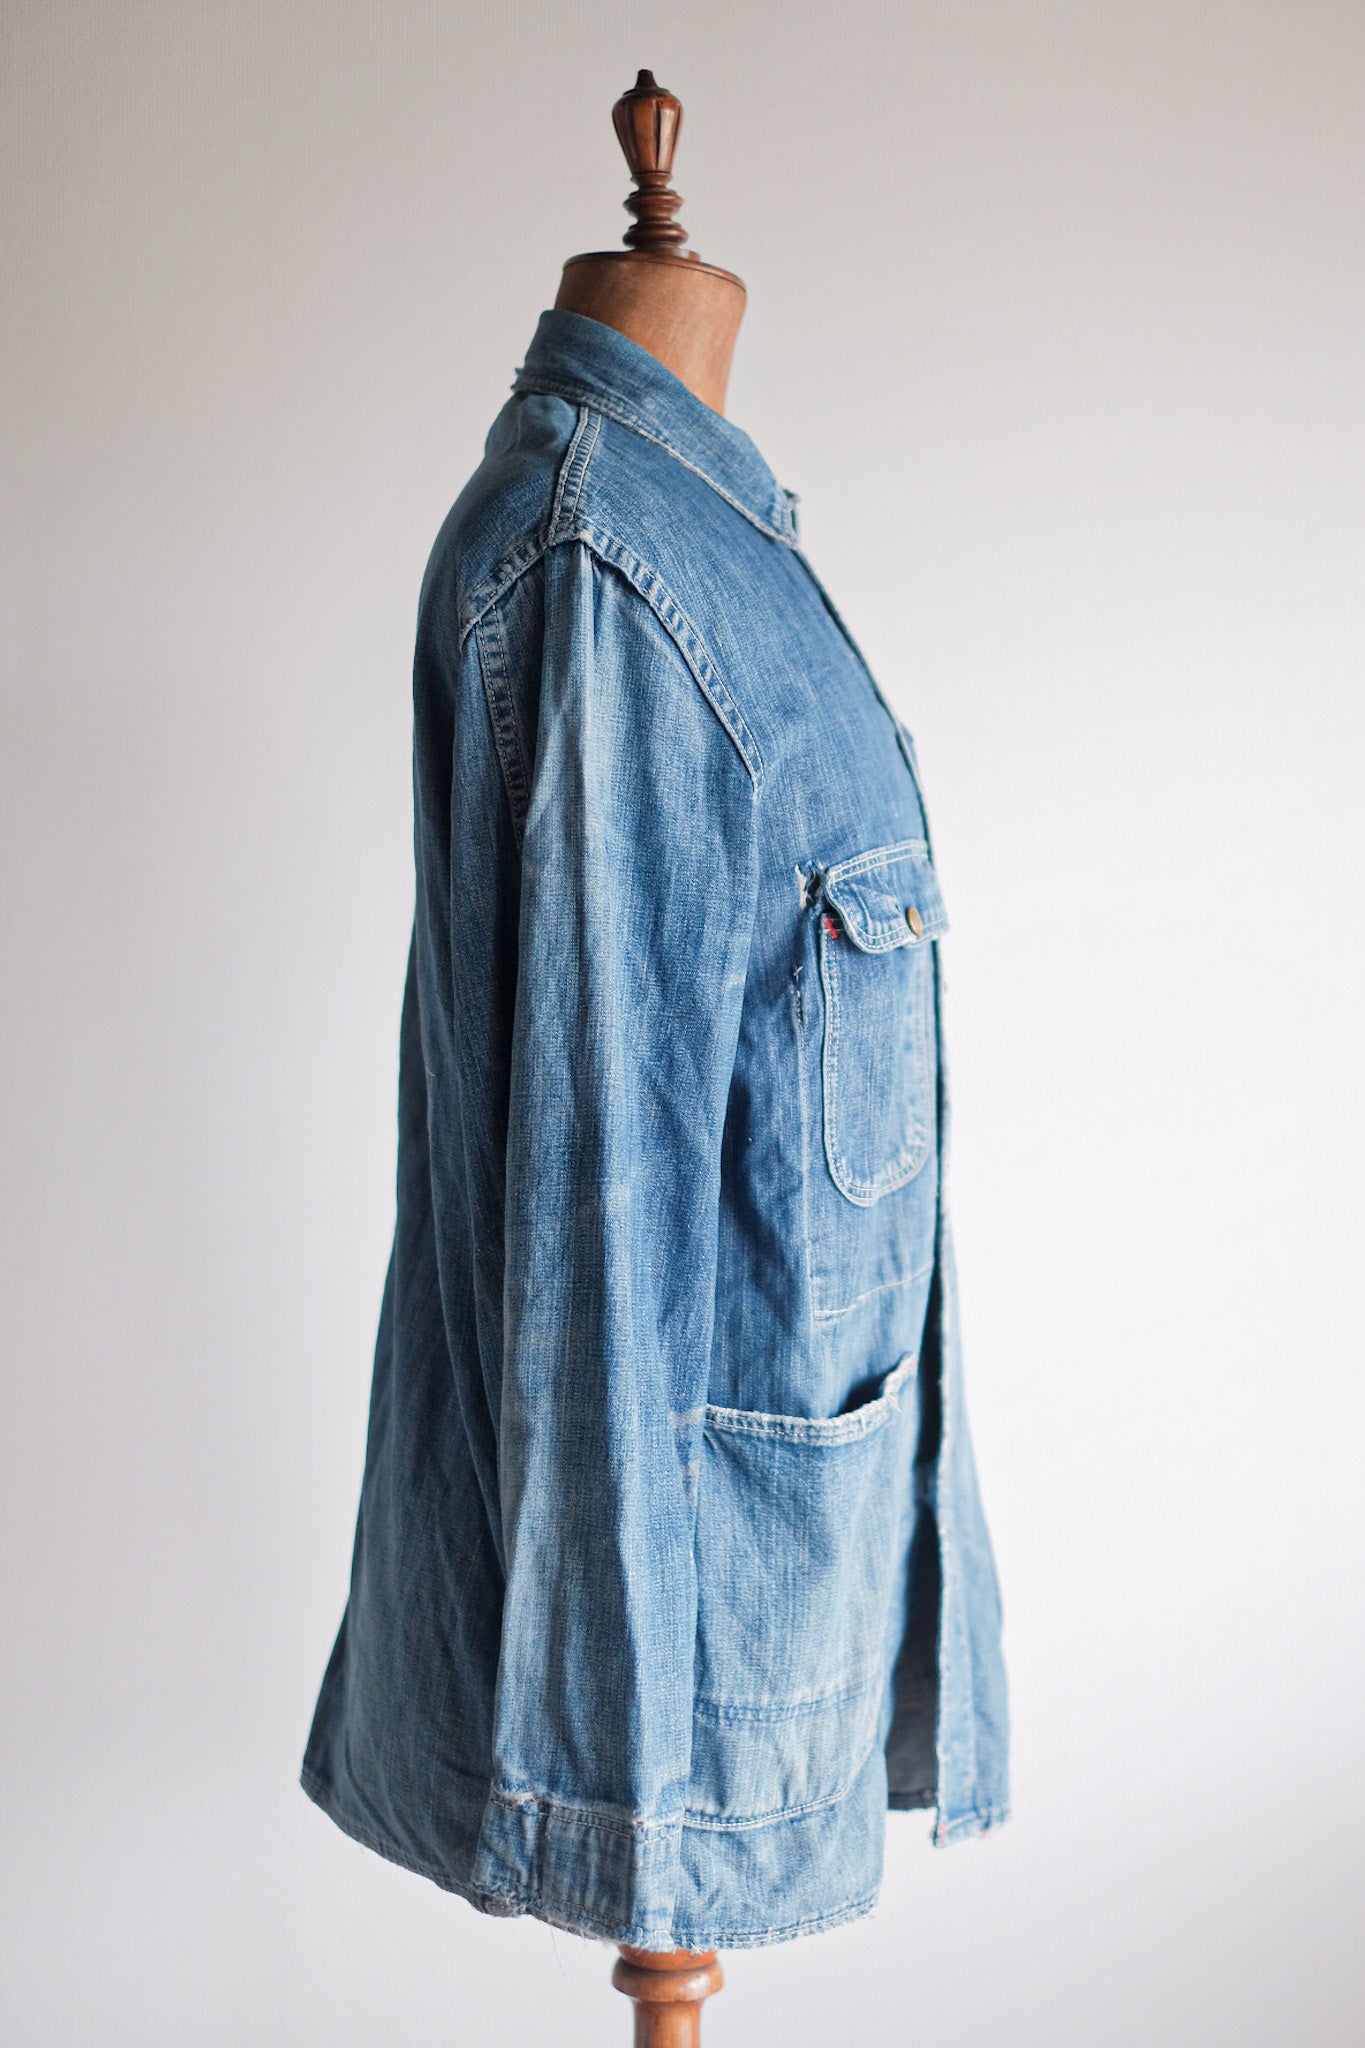 [~ 40 's] American Vintage Denim Coverall "Test by Rice-Stix"